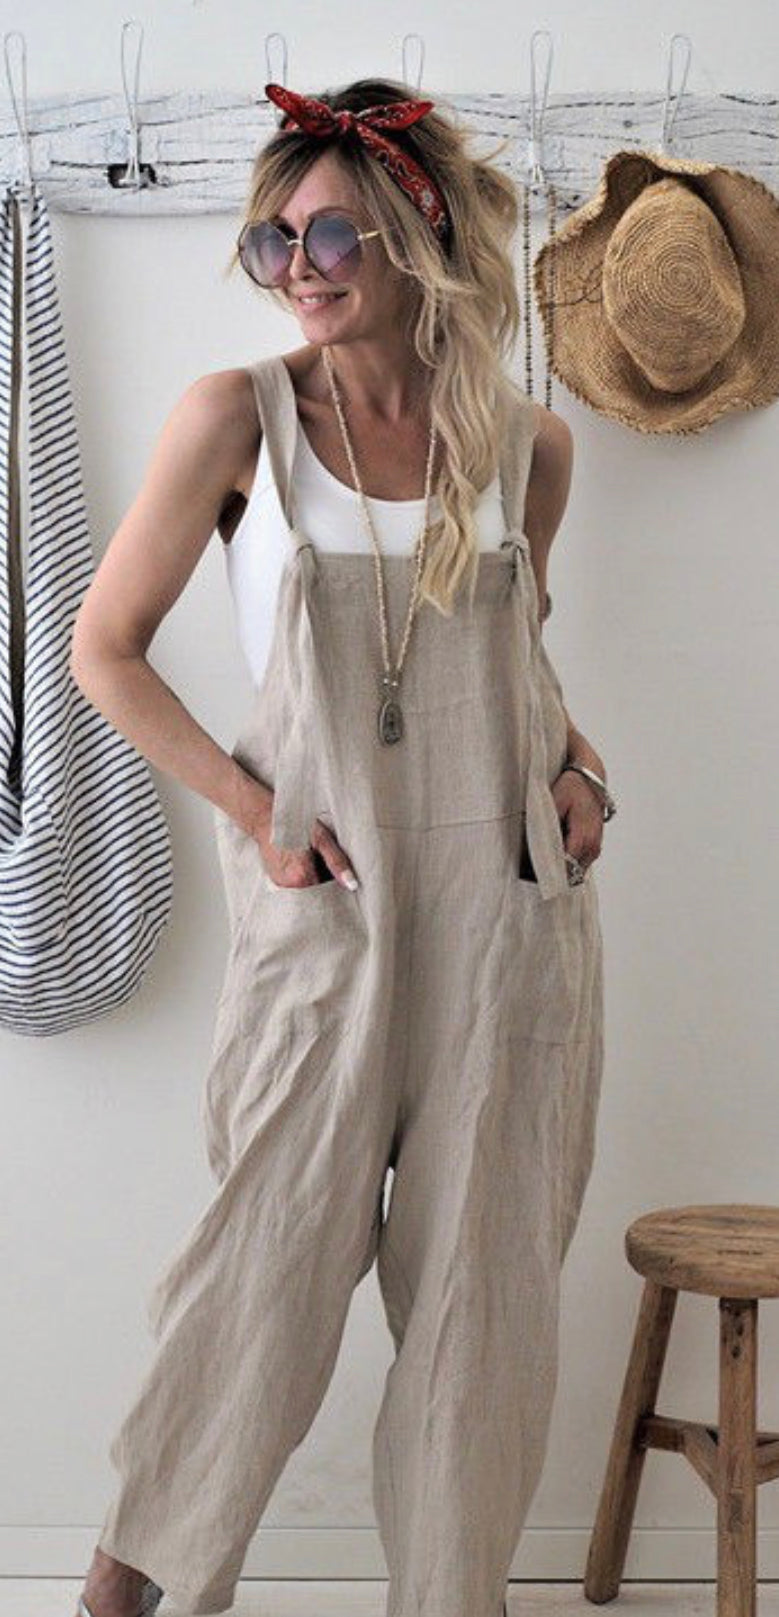 The Olive overall